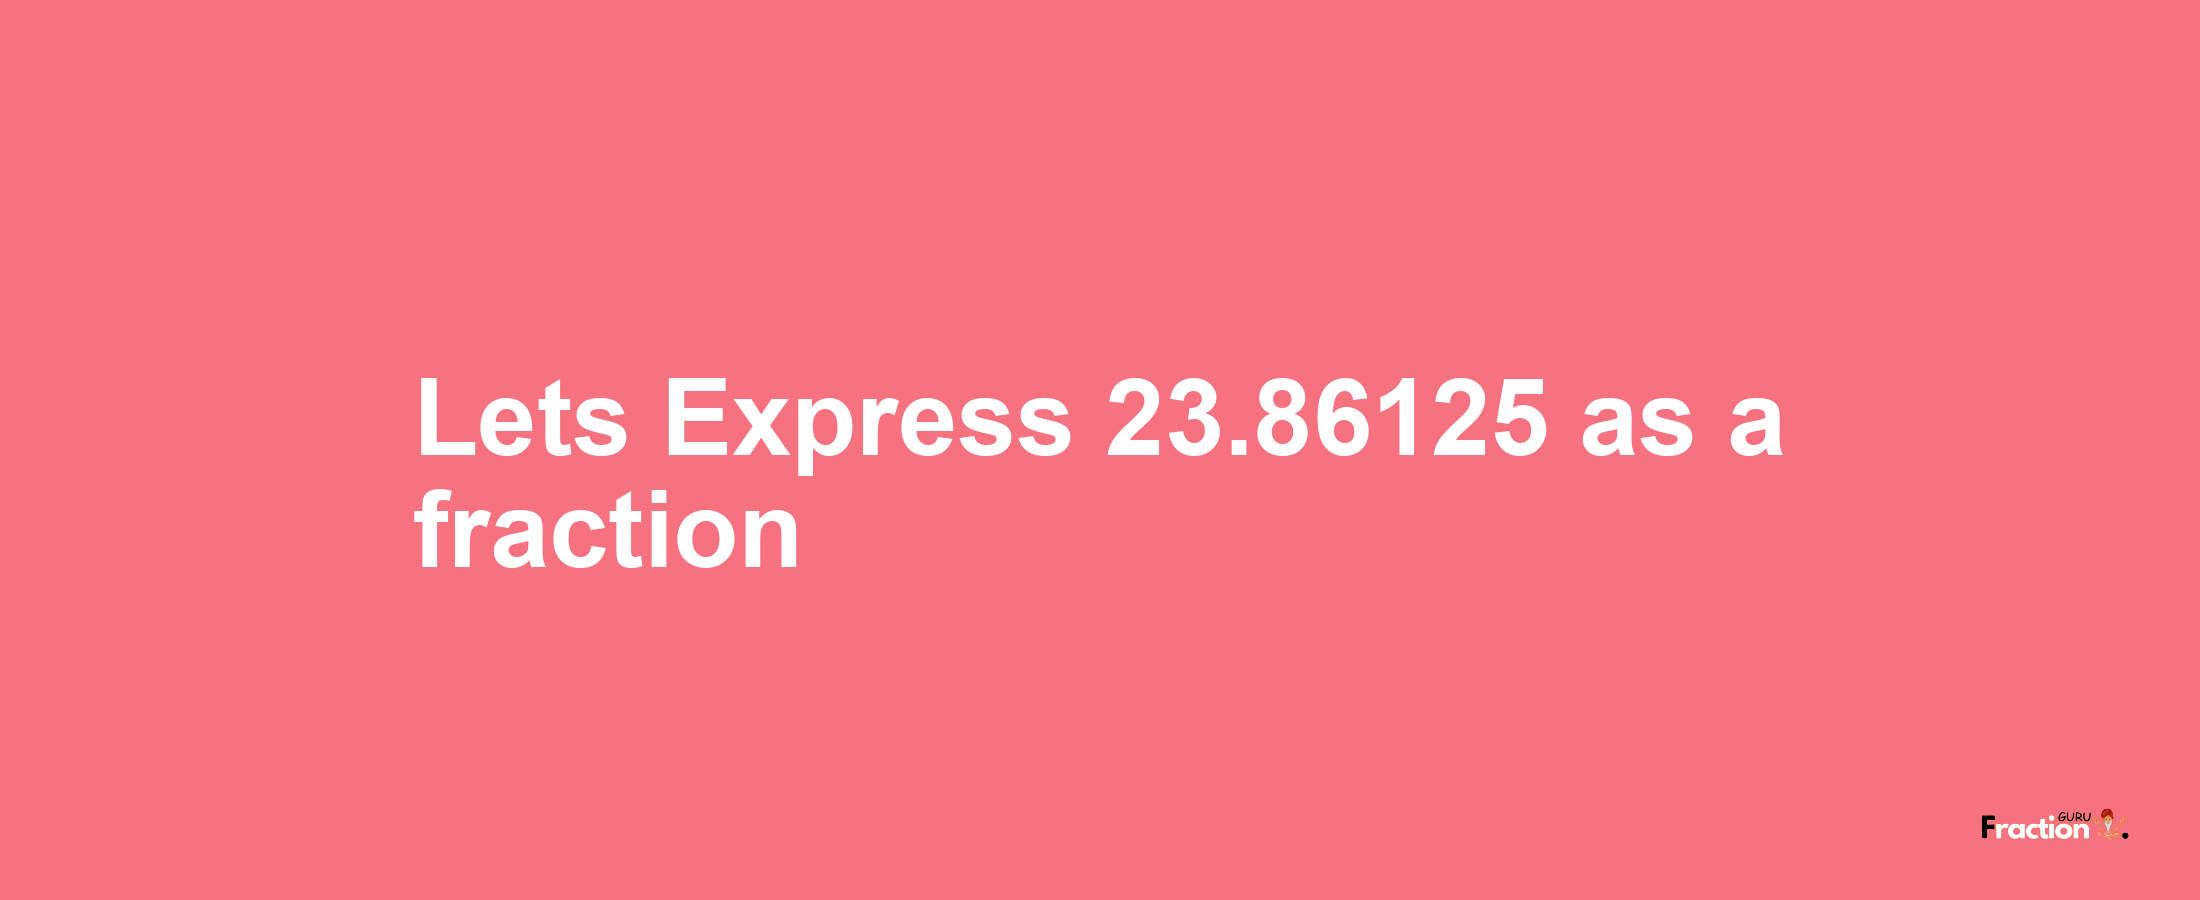 Lets Express 23.86125 as afraction